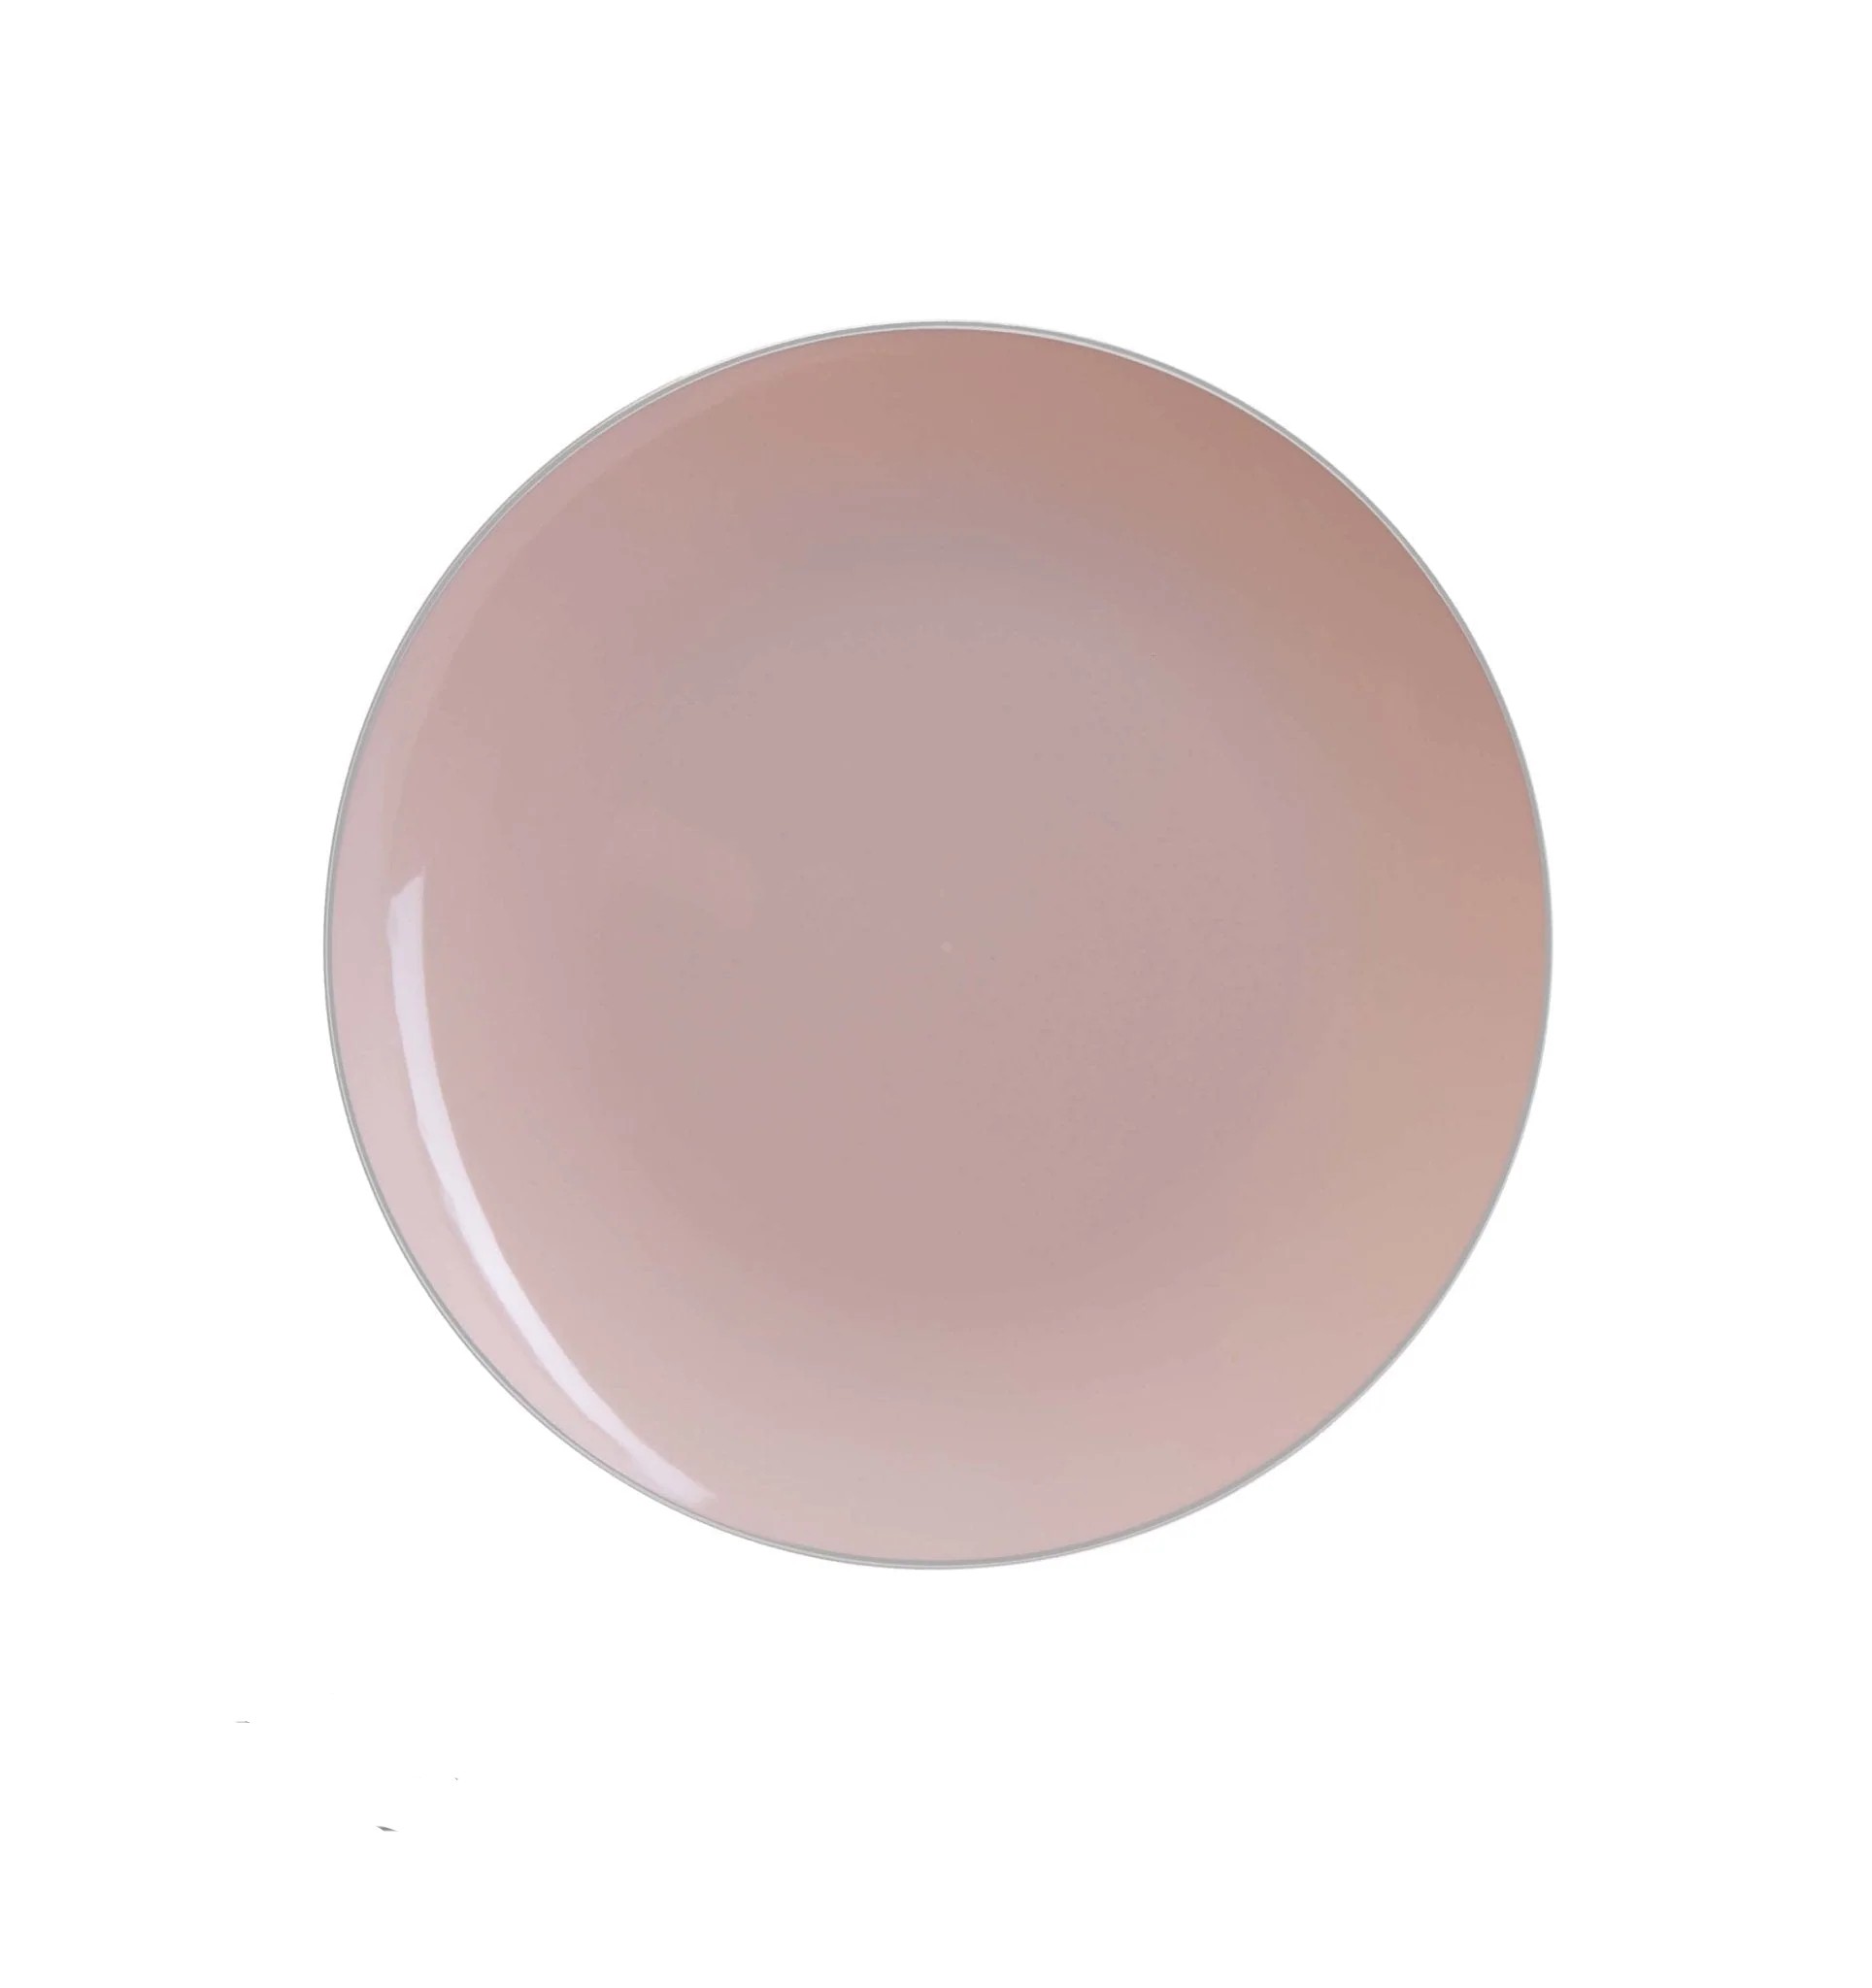 Luxe Party Blush Silver Rim Round Plastic Dinner Plate 10.25